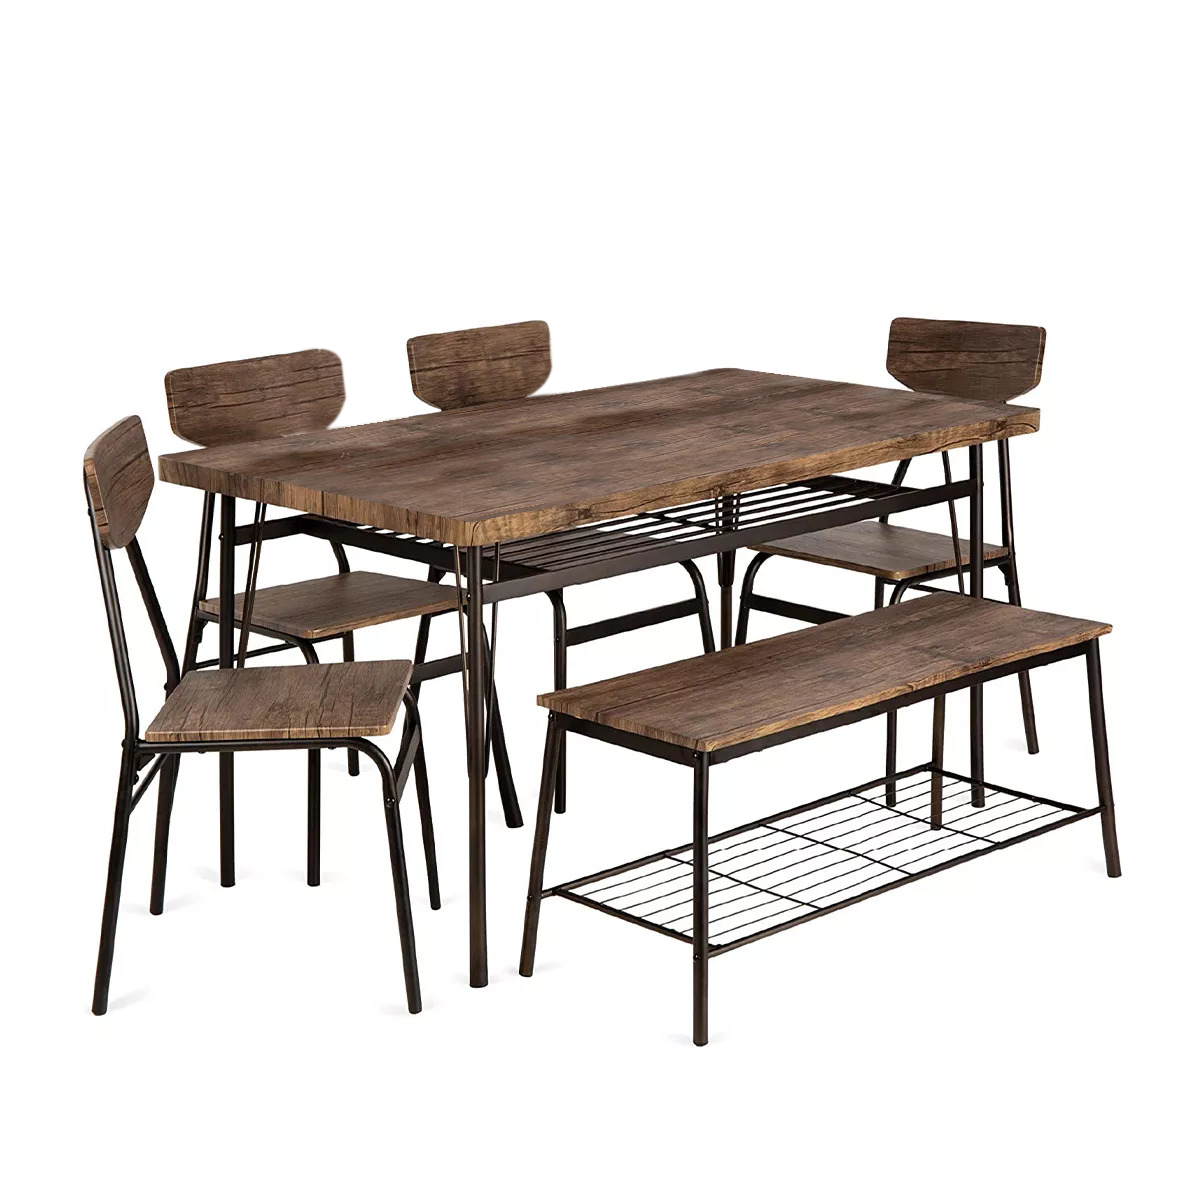 Anchor Home Dining Table Set - With shelve 4 Chairs &amp; Bench - Rustic Brown